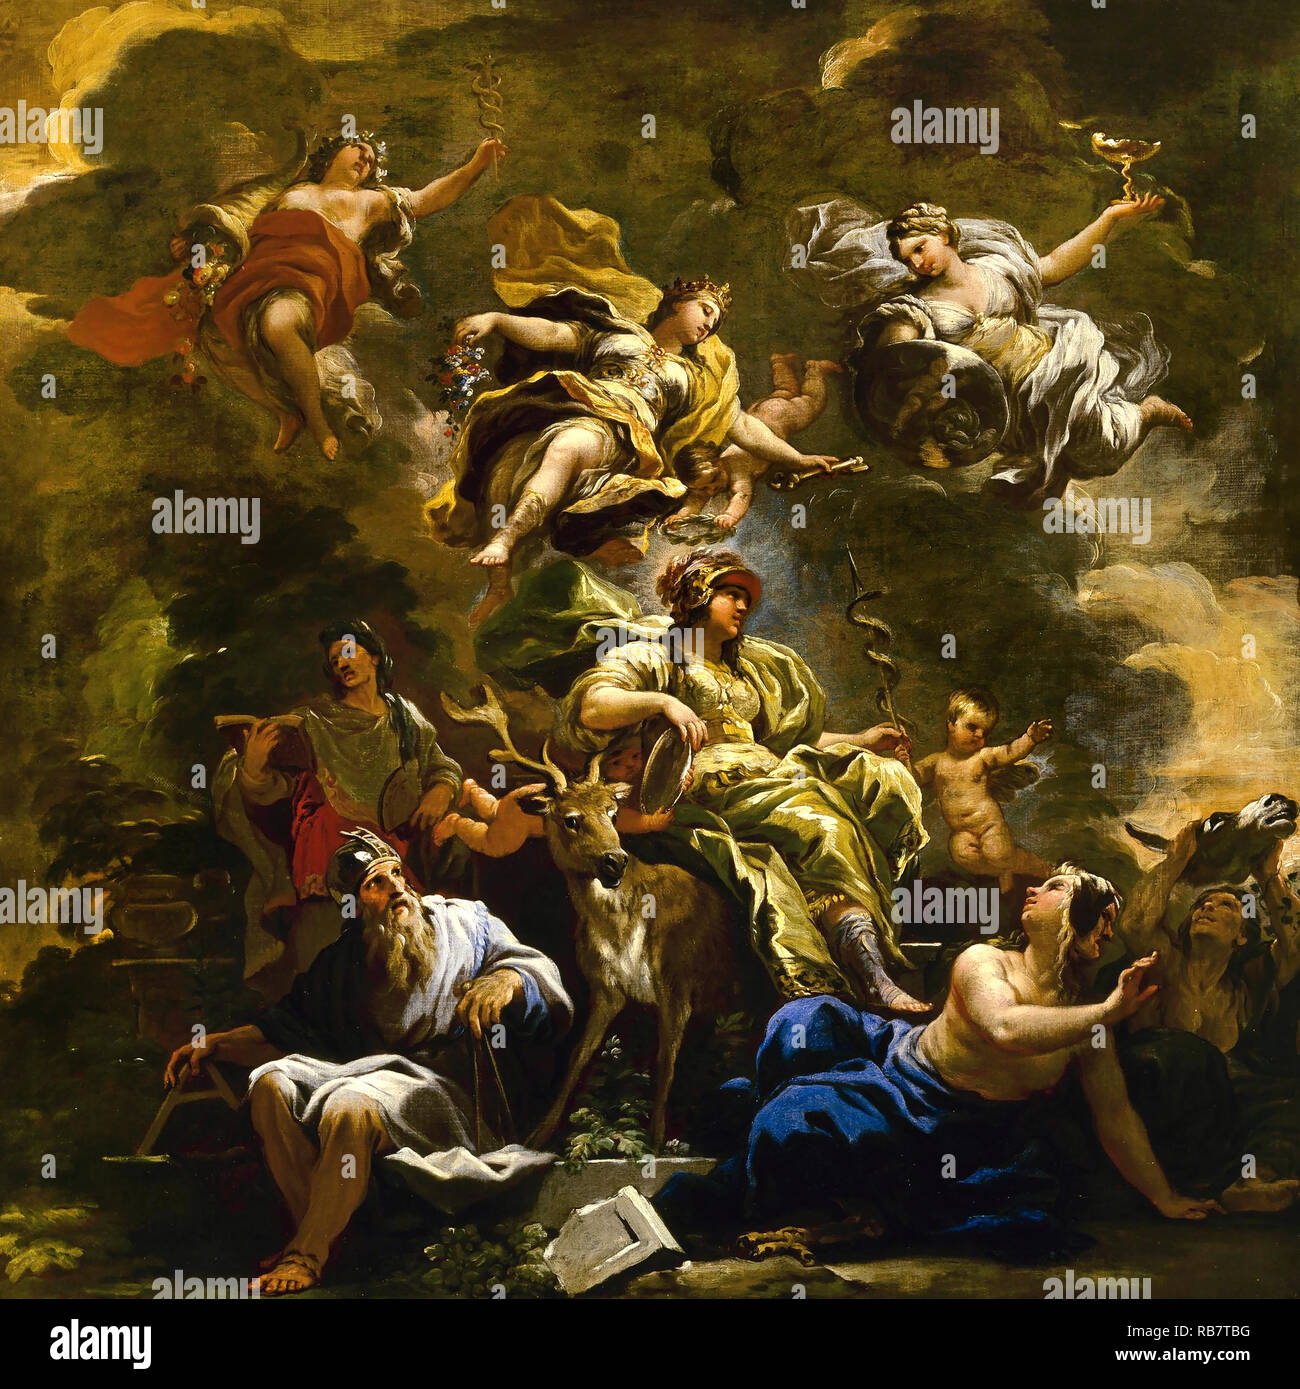 Luca Giordano, Allegory of Prudence, Circa 1680-1684 Oil on canvas, Museum of Fine Arts, Houston, USA. Stock Photo